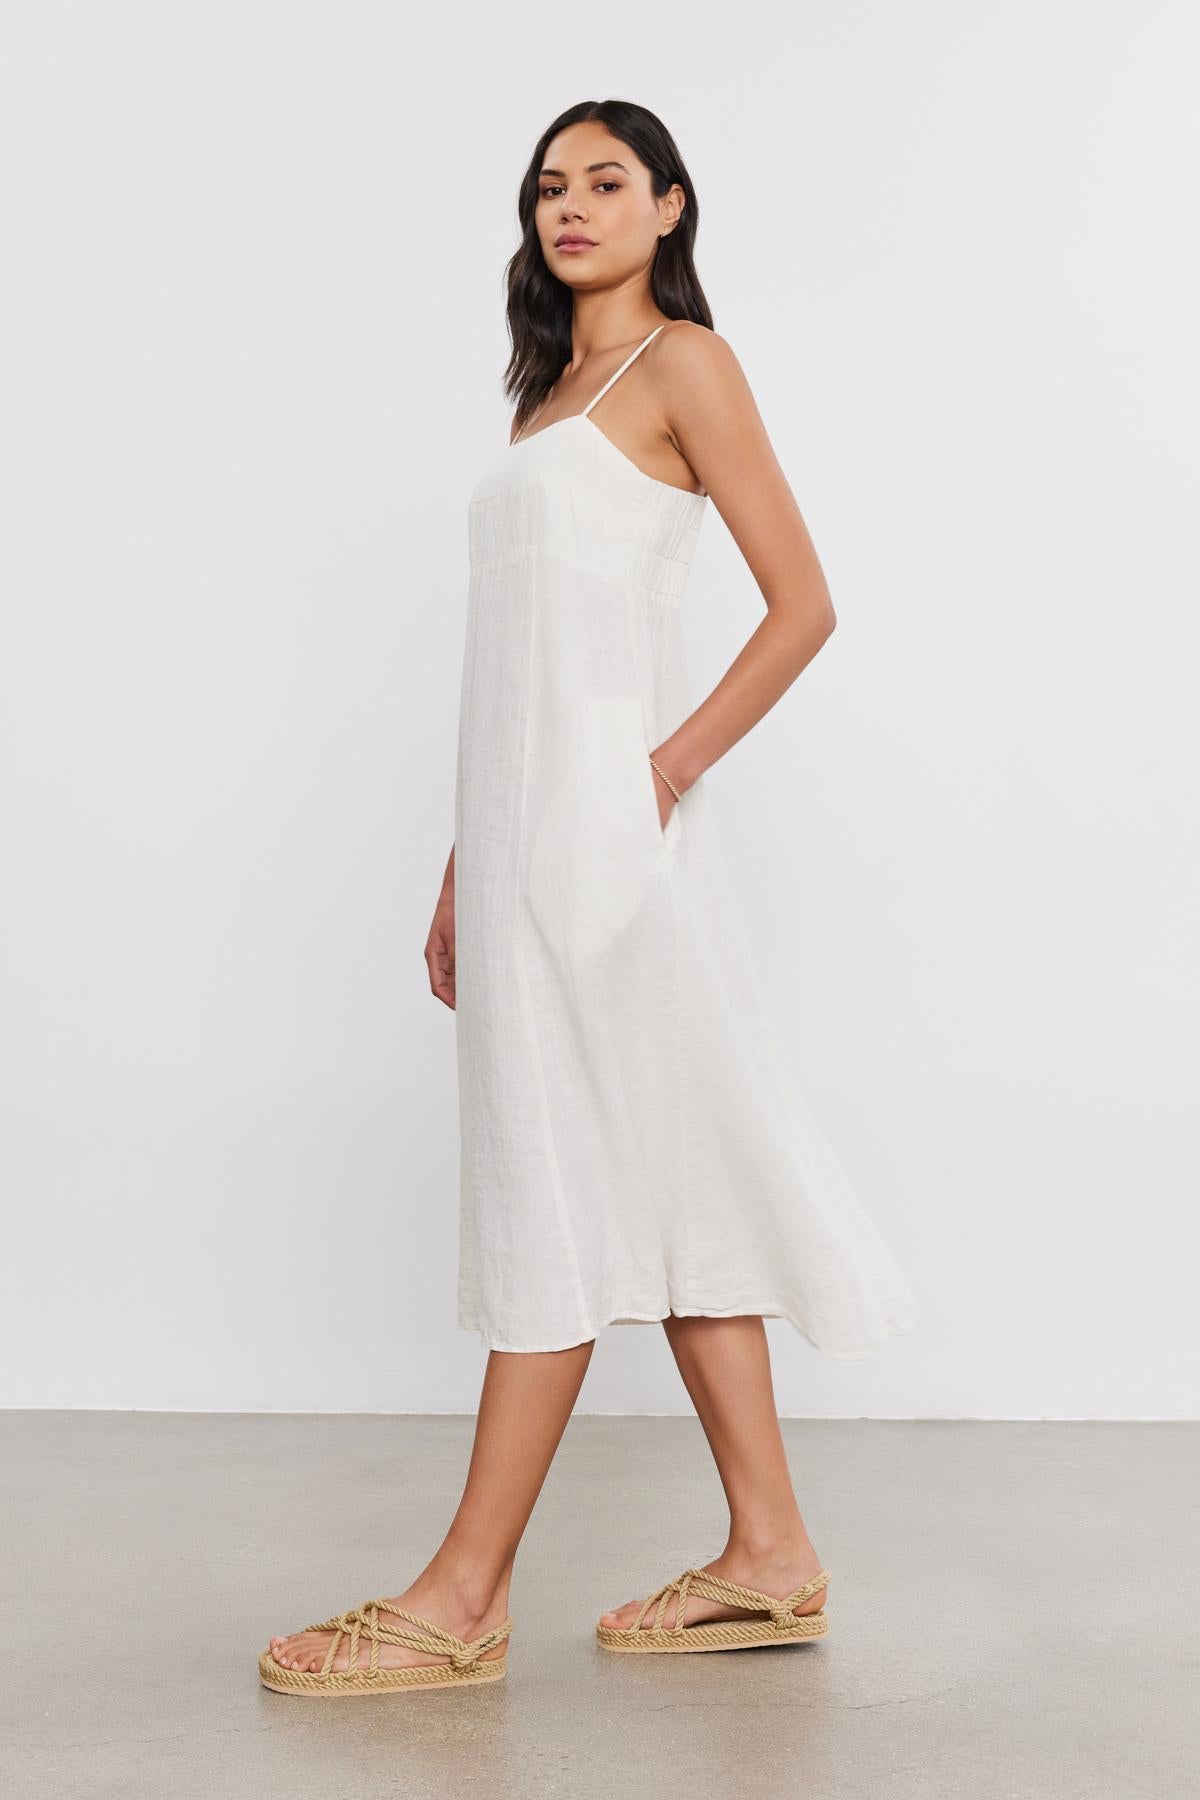 Woman wearing a sleeveless white midi dress (Stephie Linen Dress by Velvet by Graham & Spencer) and matching espadrilles, standing in a studio with a neutral background.-36752944988353